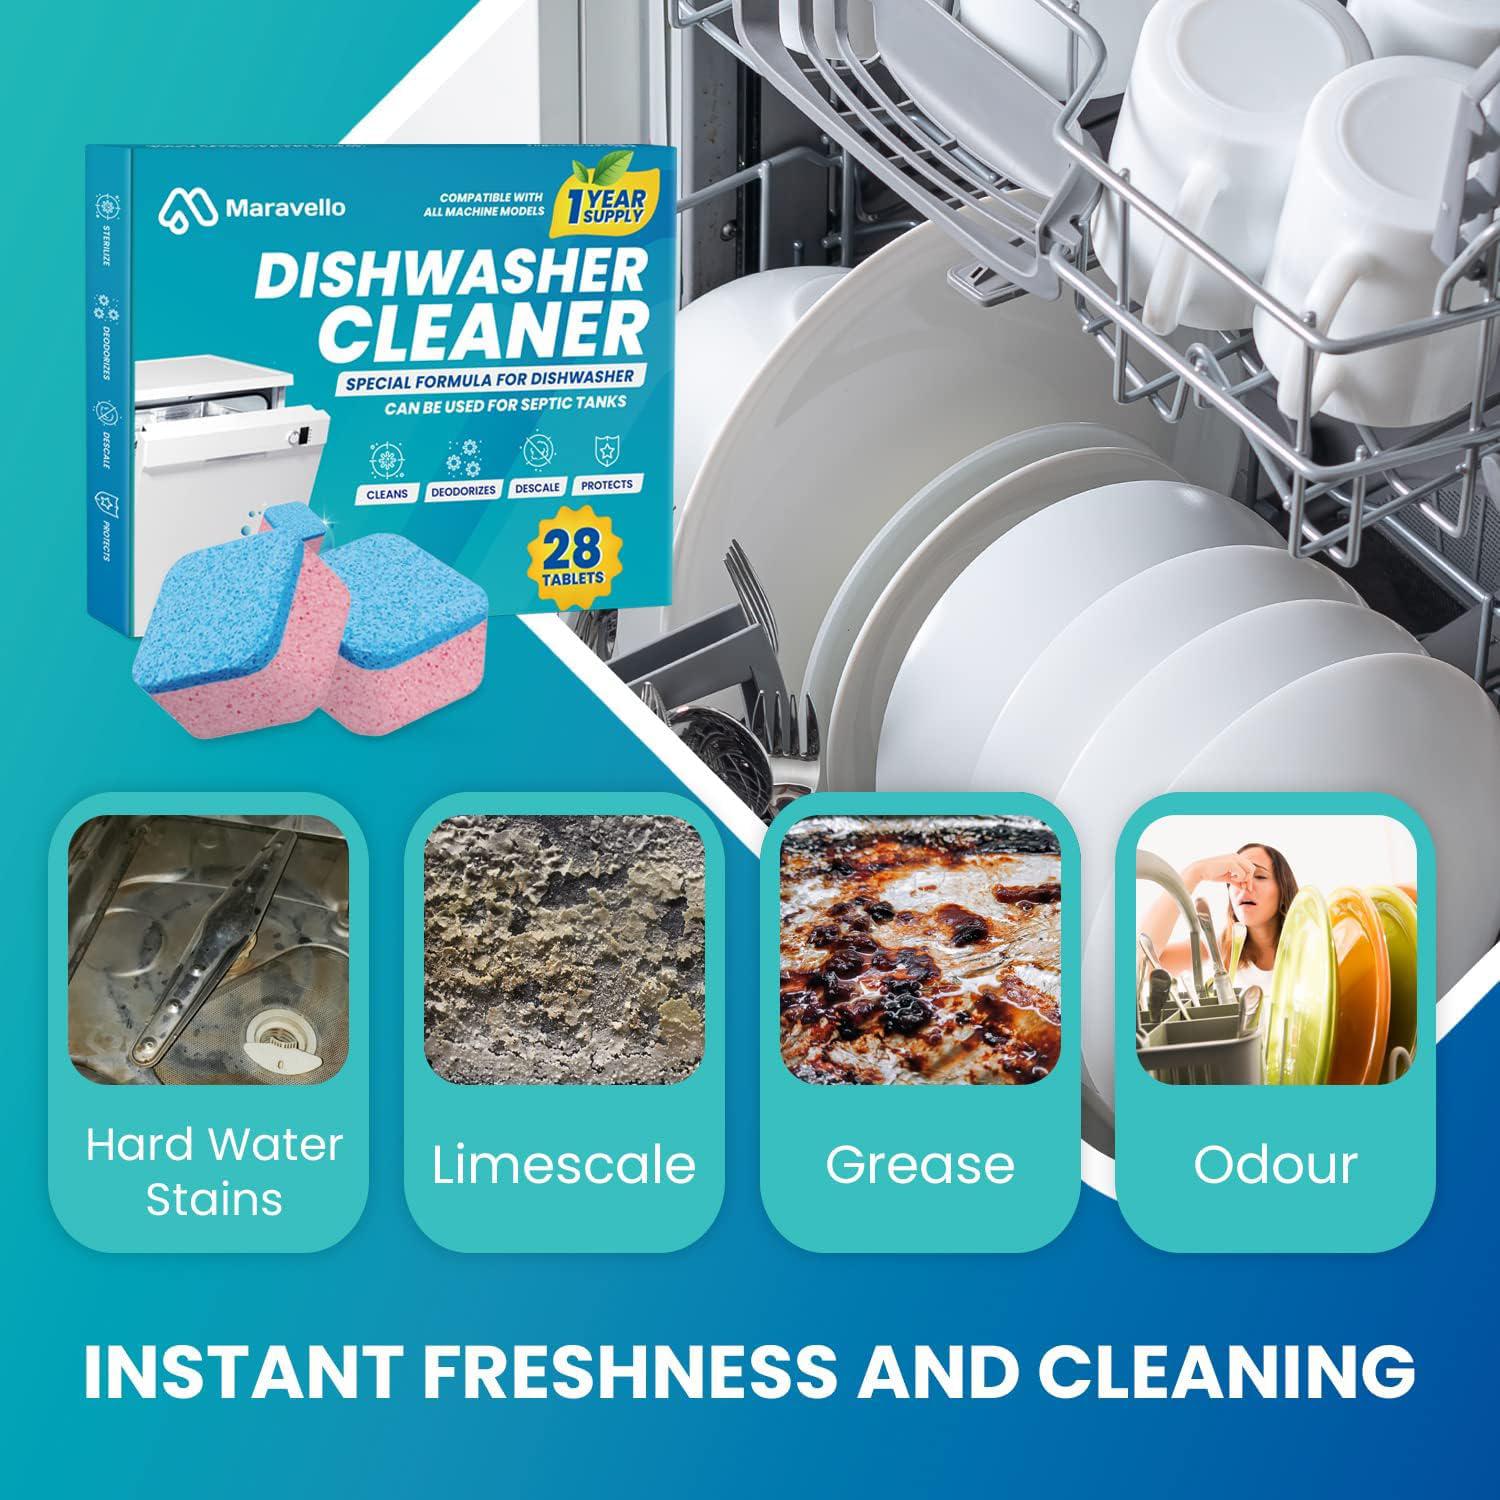 Maravello dishwasher cleaner and deodorizer 28 tablets: maravello clean dish washer machine detergent tabs - deep cleaning descaler pod